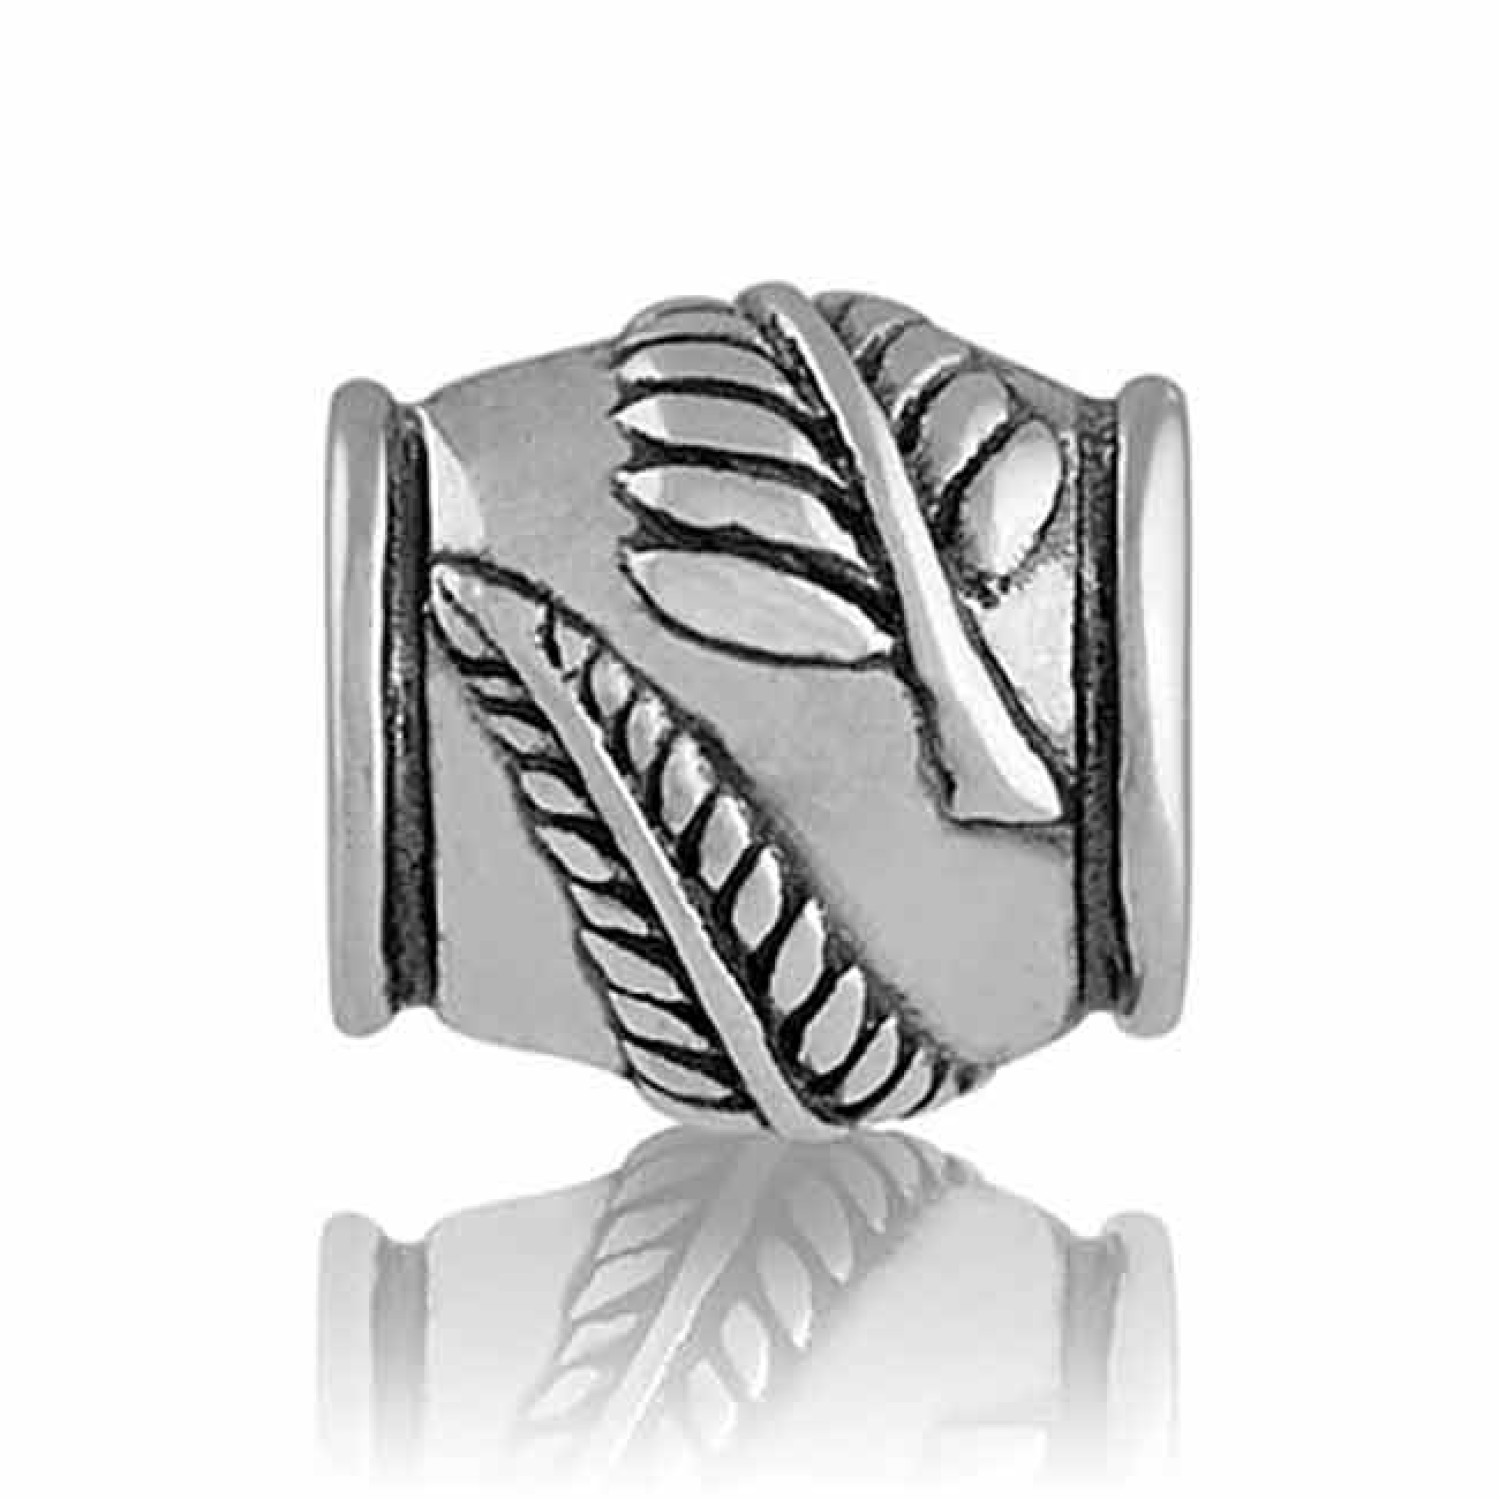 LK011 Evolve Charm NZ Silver Fern Native NZ Icon. LK011 Evolve Charm NZ Silver Fern Native NZ Icon The silver fern is a much treasured symbol of New Zealand, reminding Kiwis all over the world of their heritage and where home will forever be.  Found in ou